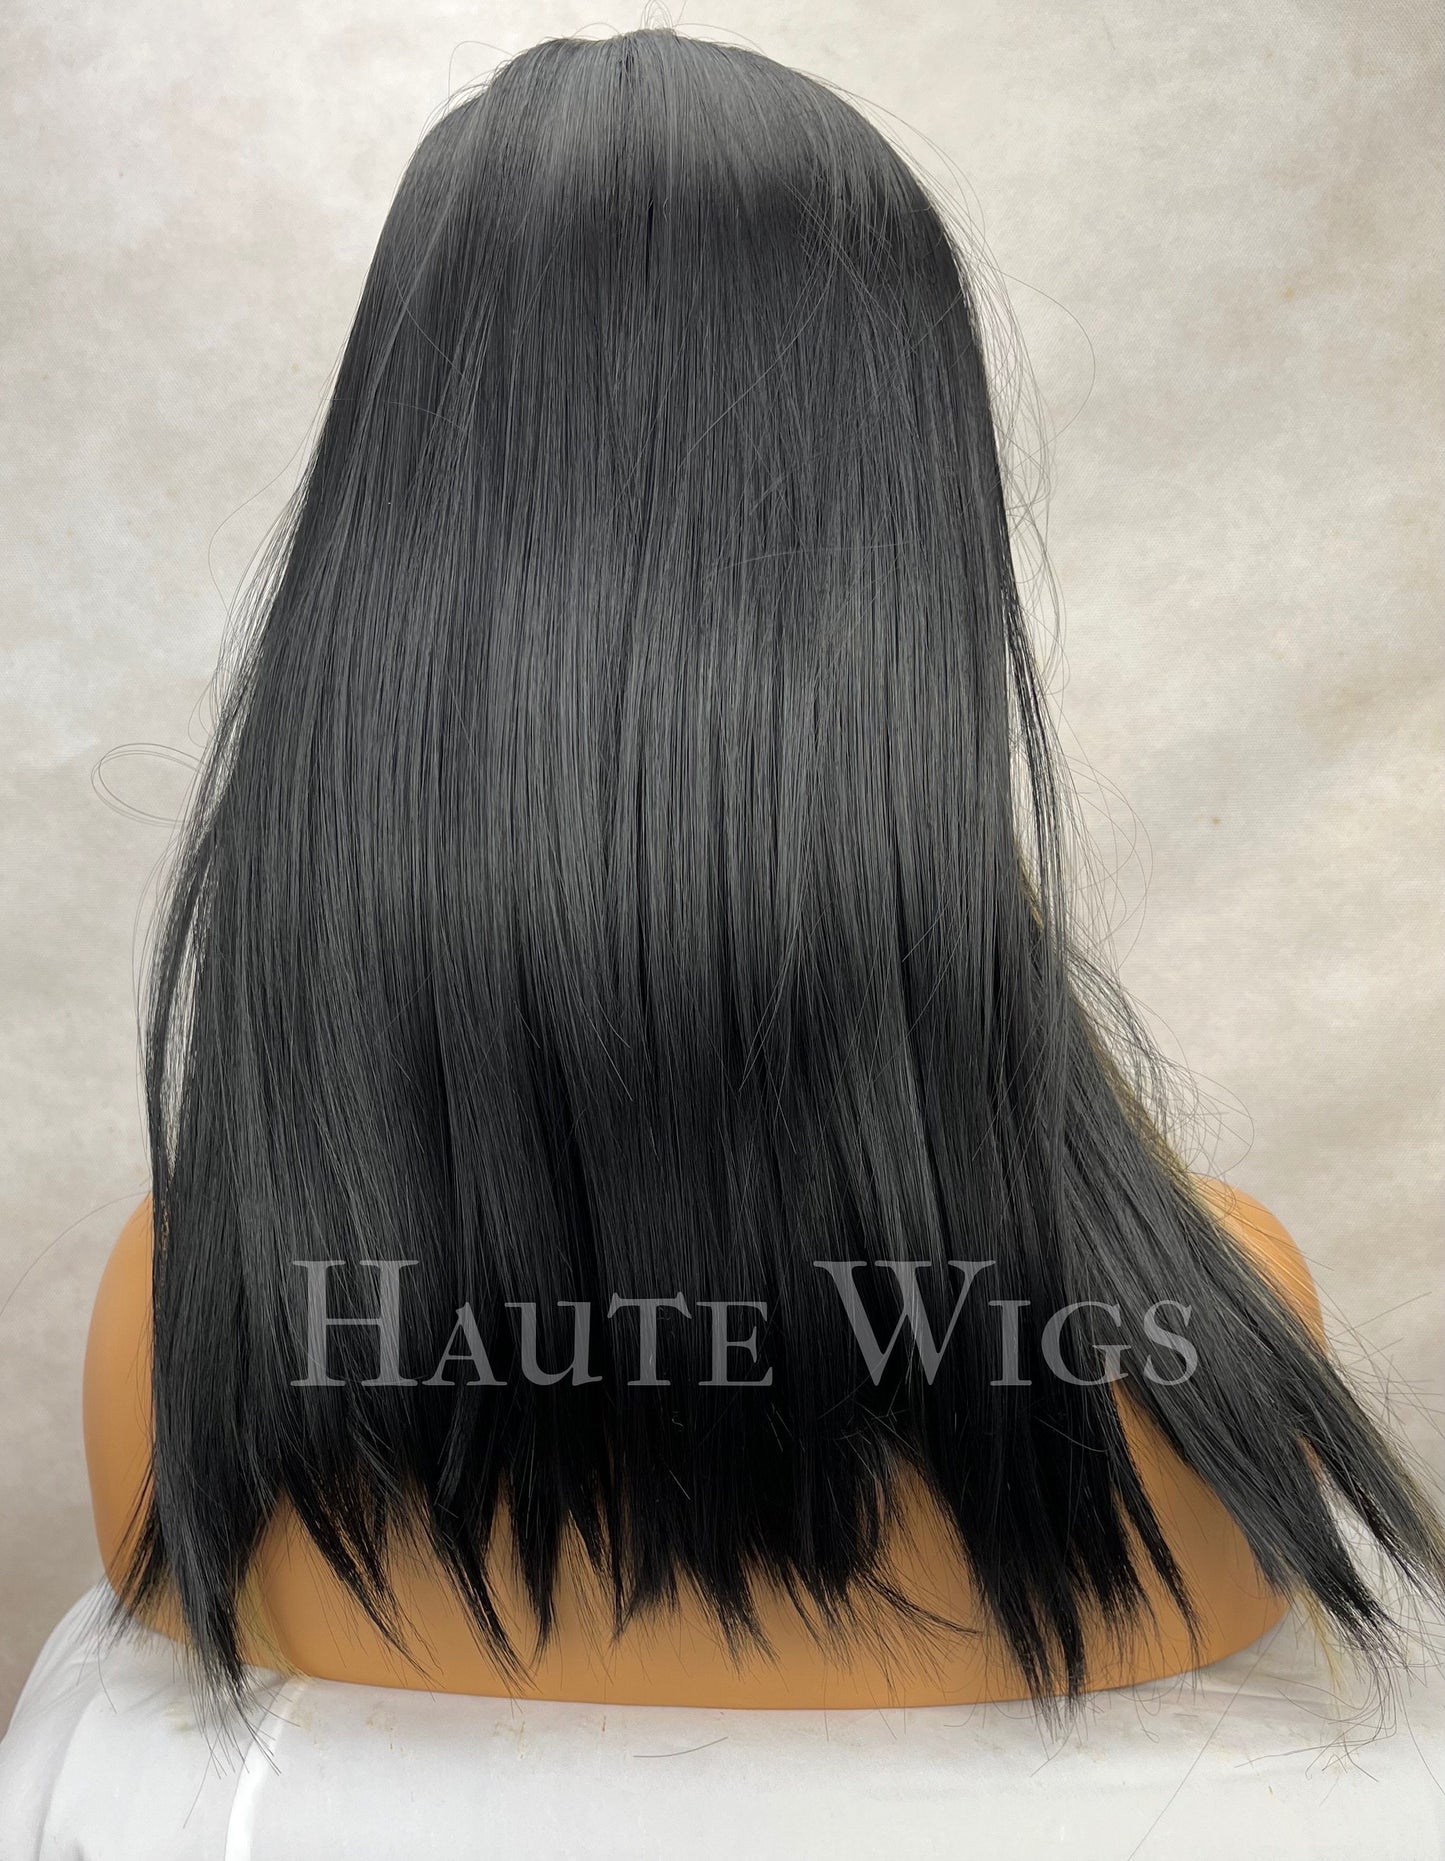 Hot mess - 20 Inch Long Womens Wig Black Brown | Golden Blonde Highlights Streaks Money Piece bangs fringe straight haute wigs role play